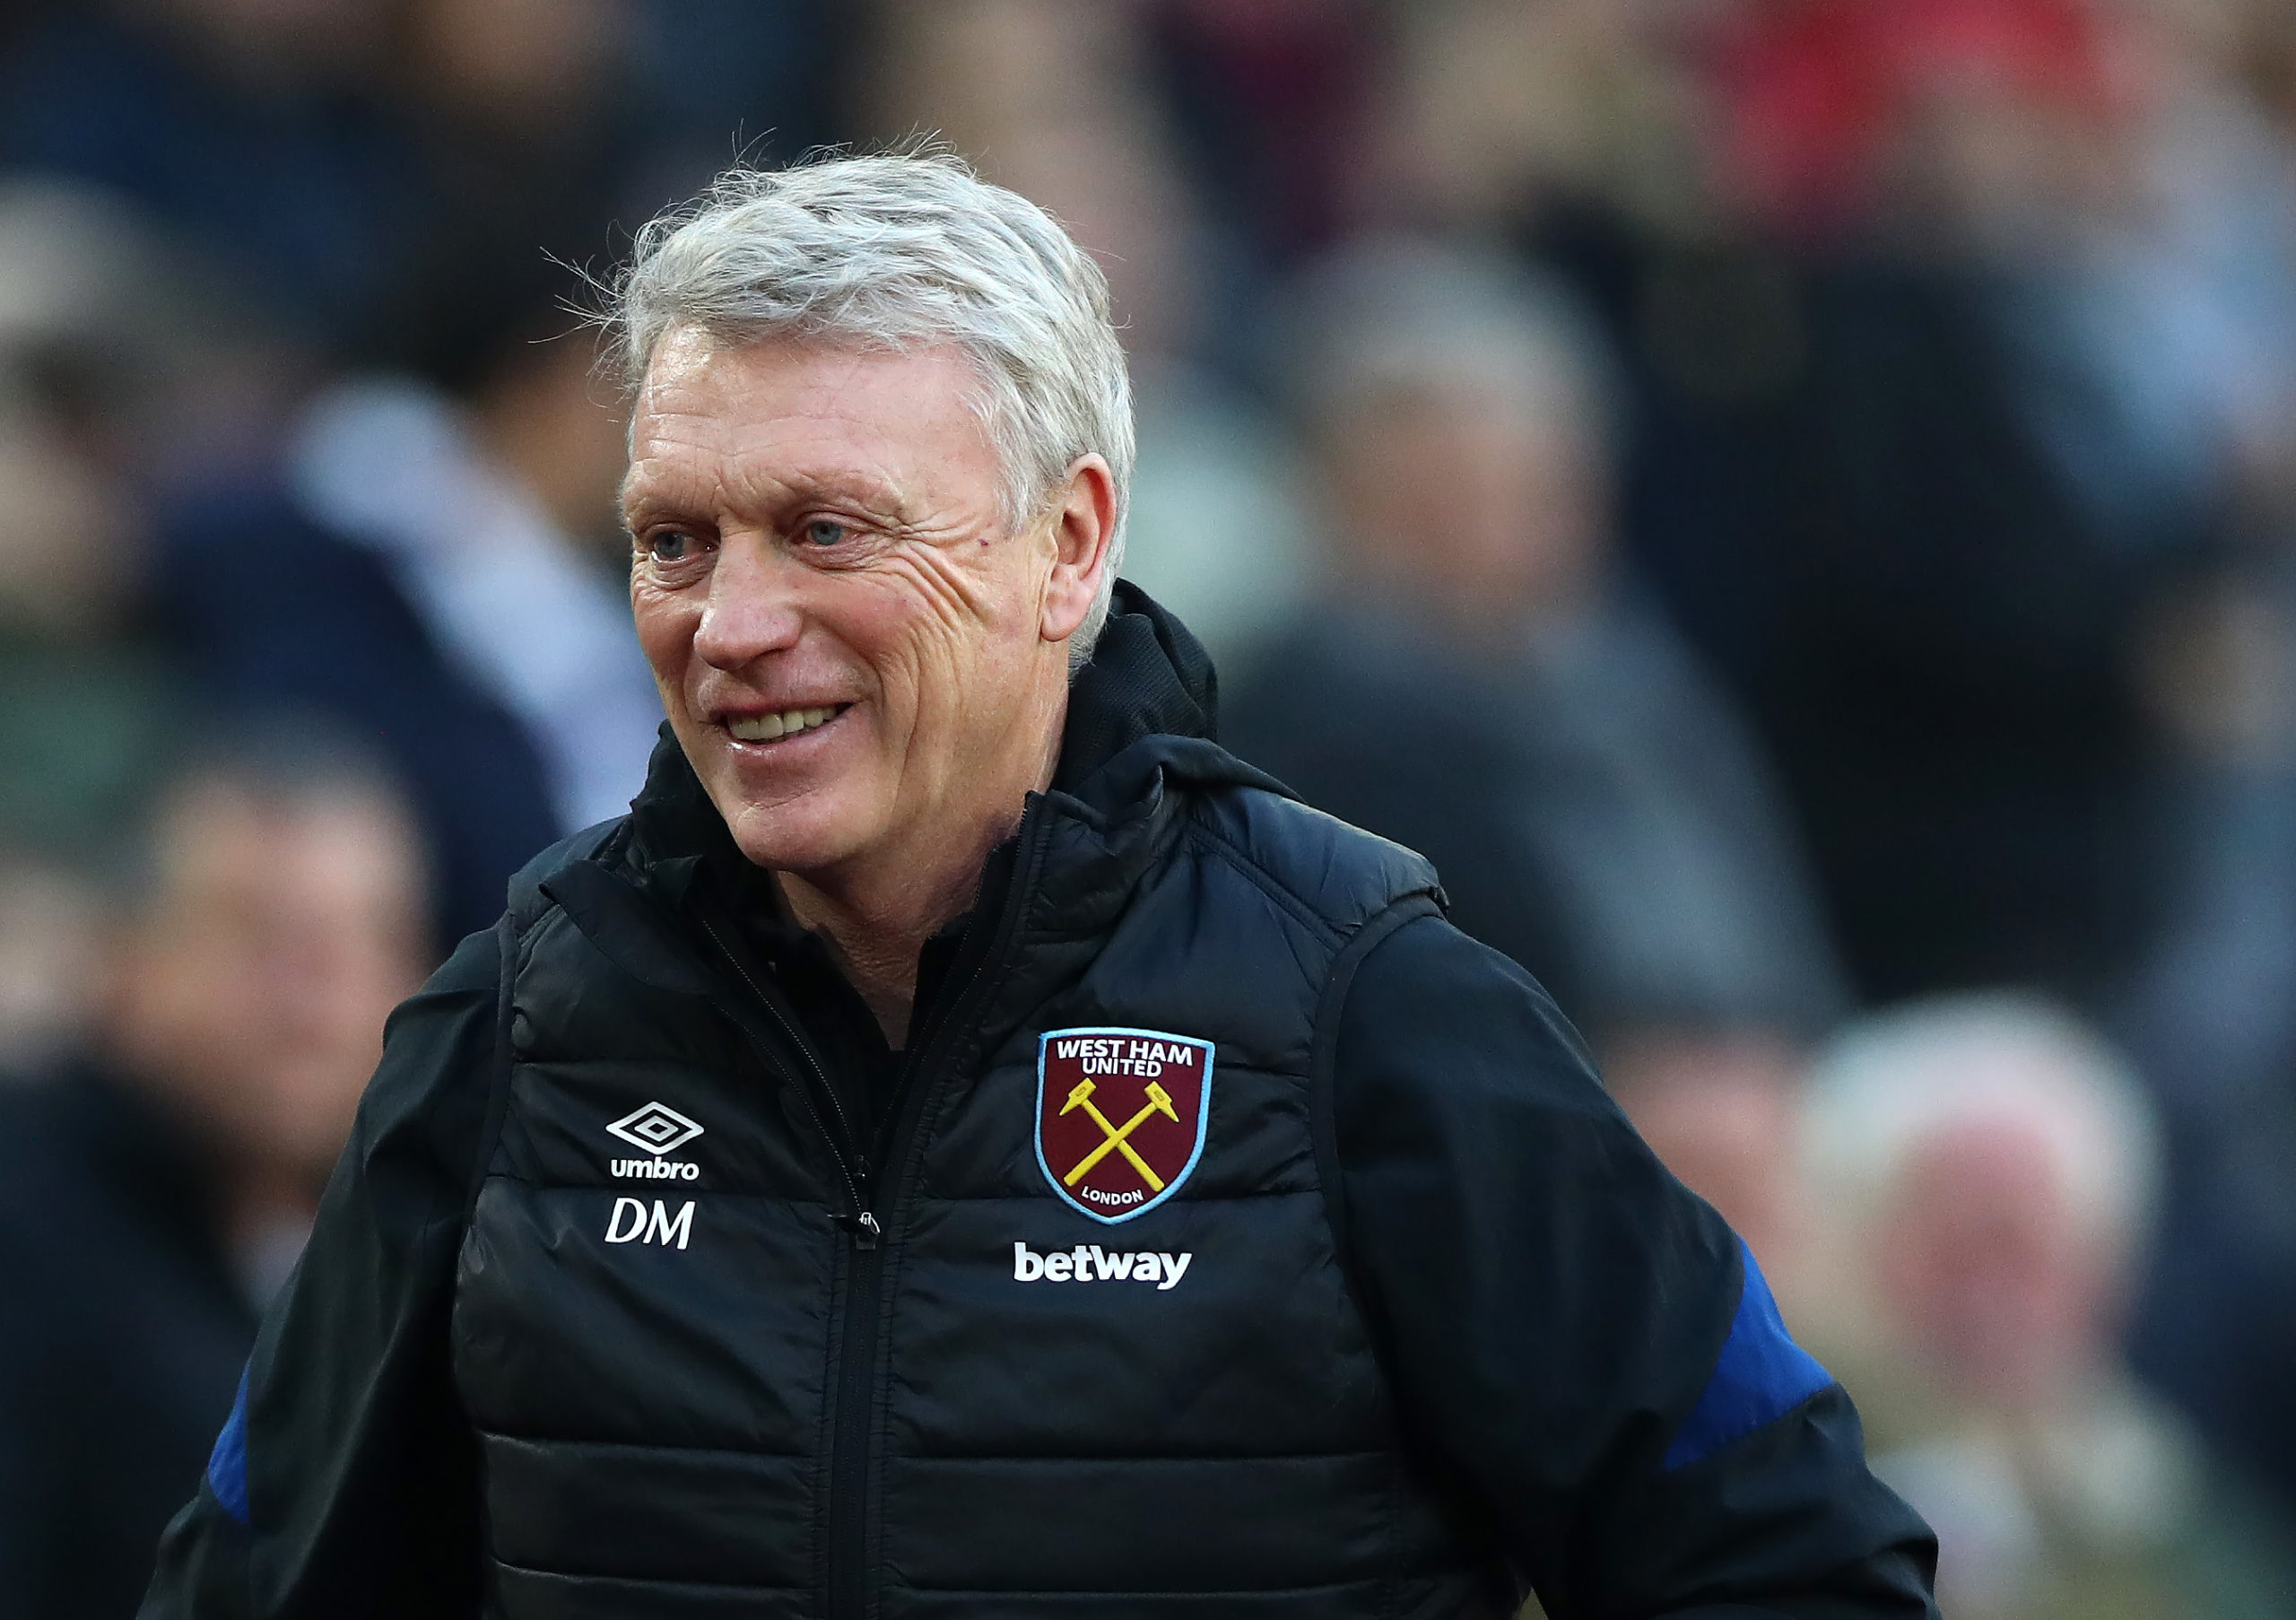 David Moyes must replace Andriy Yarmolenko with West Ham under-23 starlet for Premier League match-day squads